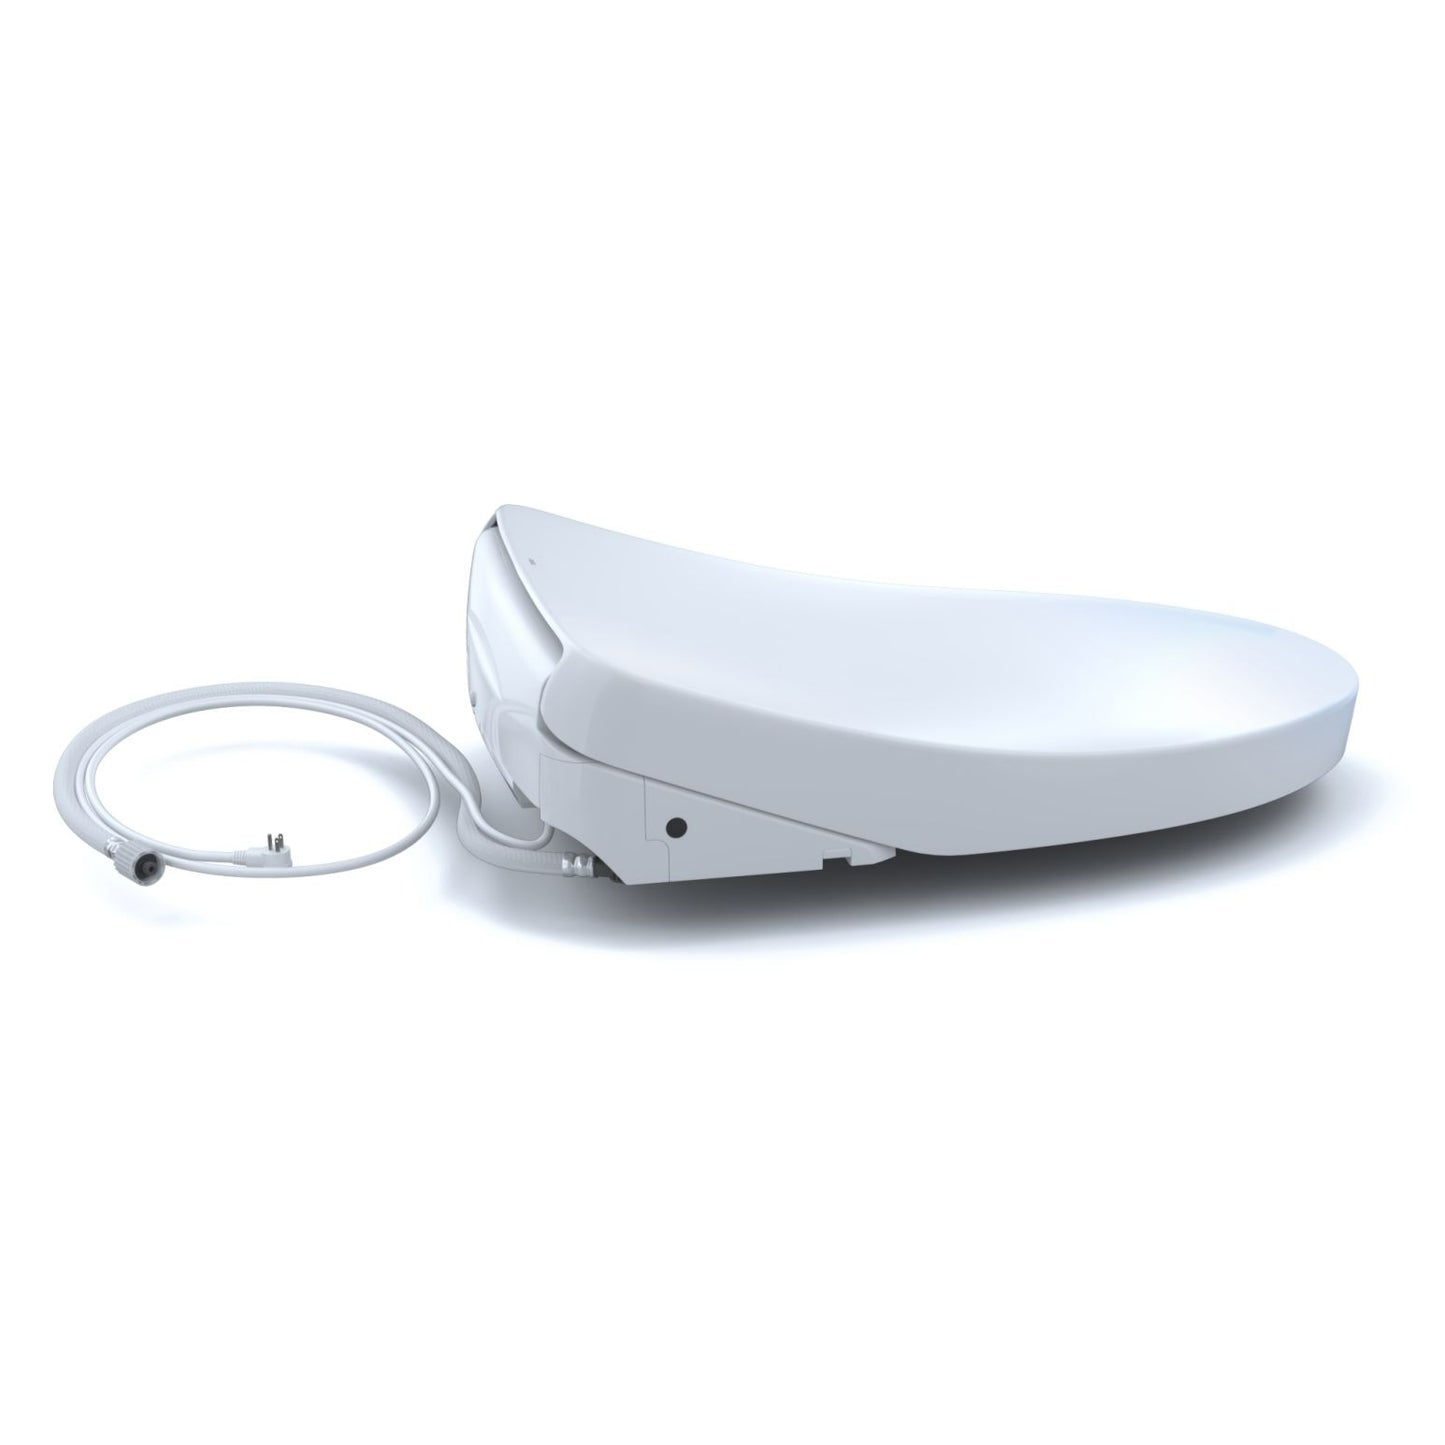 Toto SW3056#01 - Washlet S550E Elongated Bidet Seat with Remote and Dual Action Spray - Cotton White